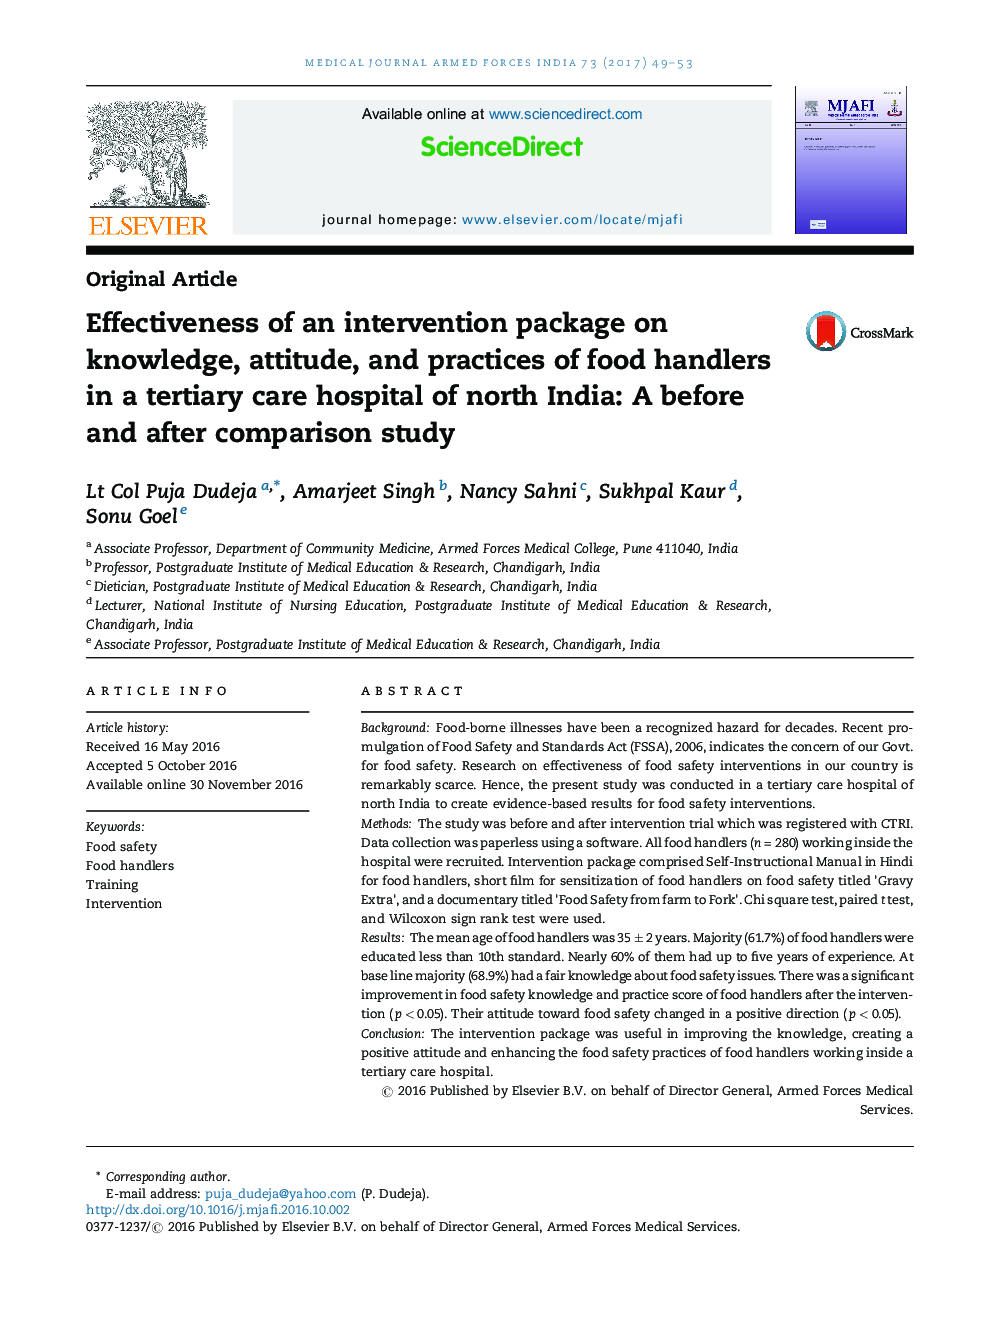 Effectiveness of an intervention package on knowledge, attitude, and practices of food handlers in a tertiary care hospital of north India: A before and after comparison study